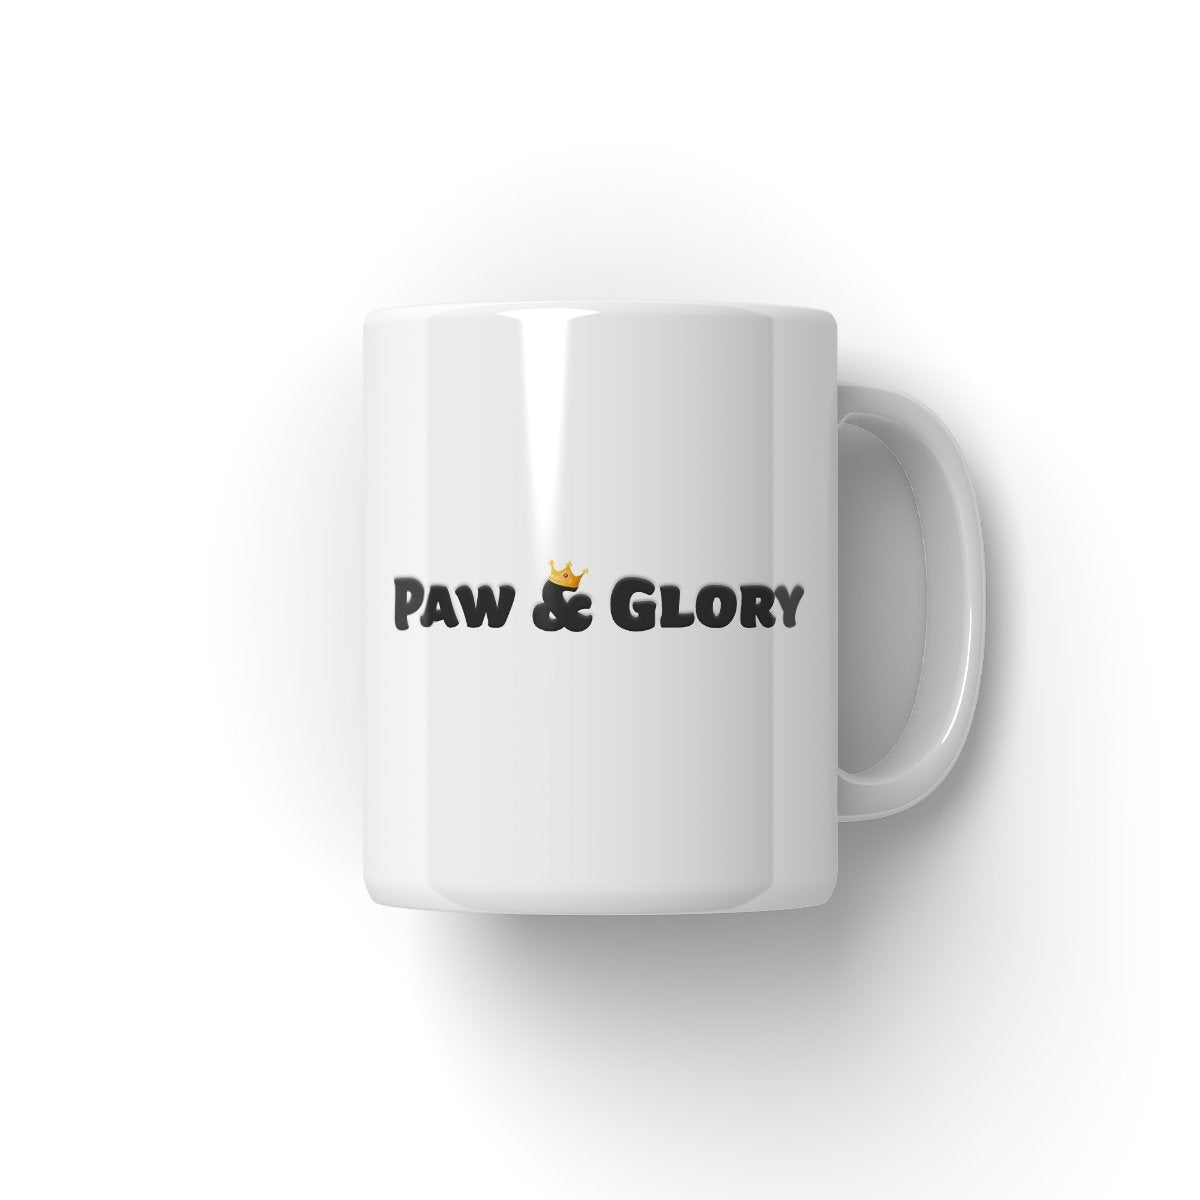 personalized pet coffee mugs, funny,  dog picture on coffee mugs, pet photo coffee mugs, marvel, comic, custom pet portraits coffee mugs, pet portraits on coffee mugs, paw and glory, pawandglory